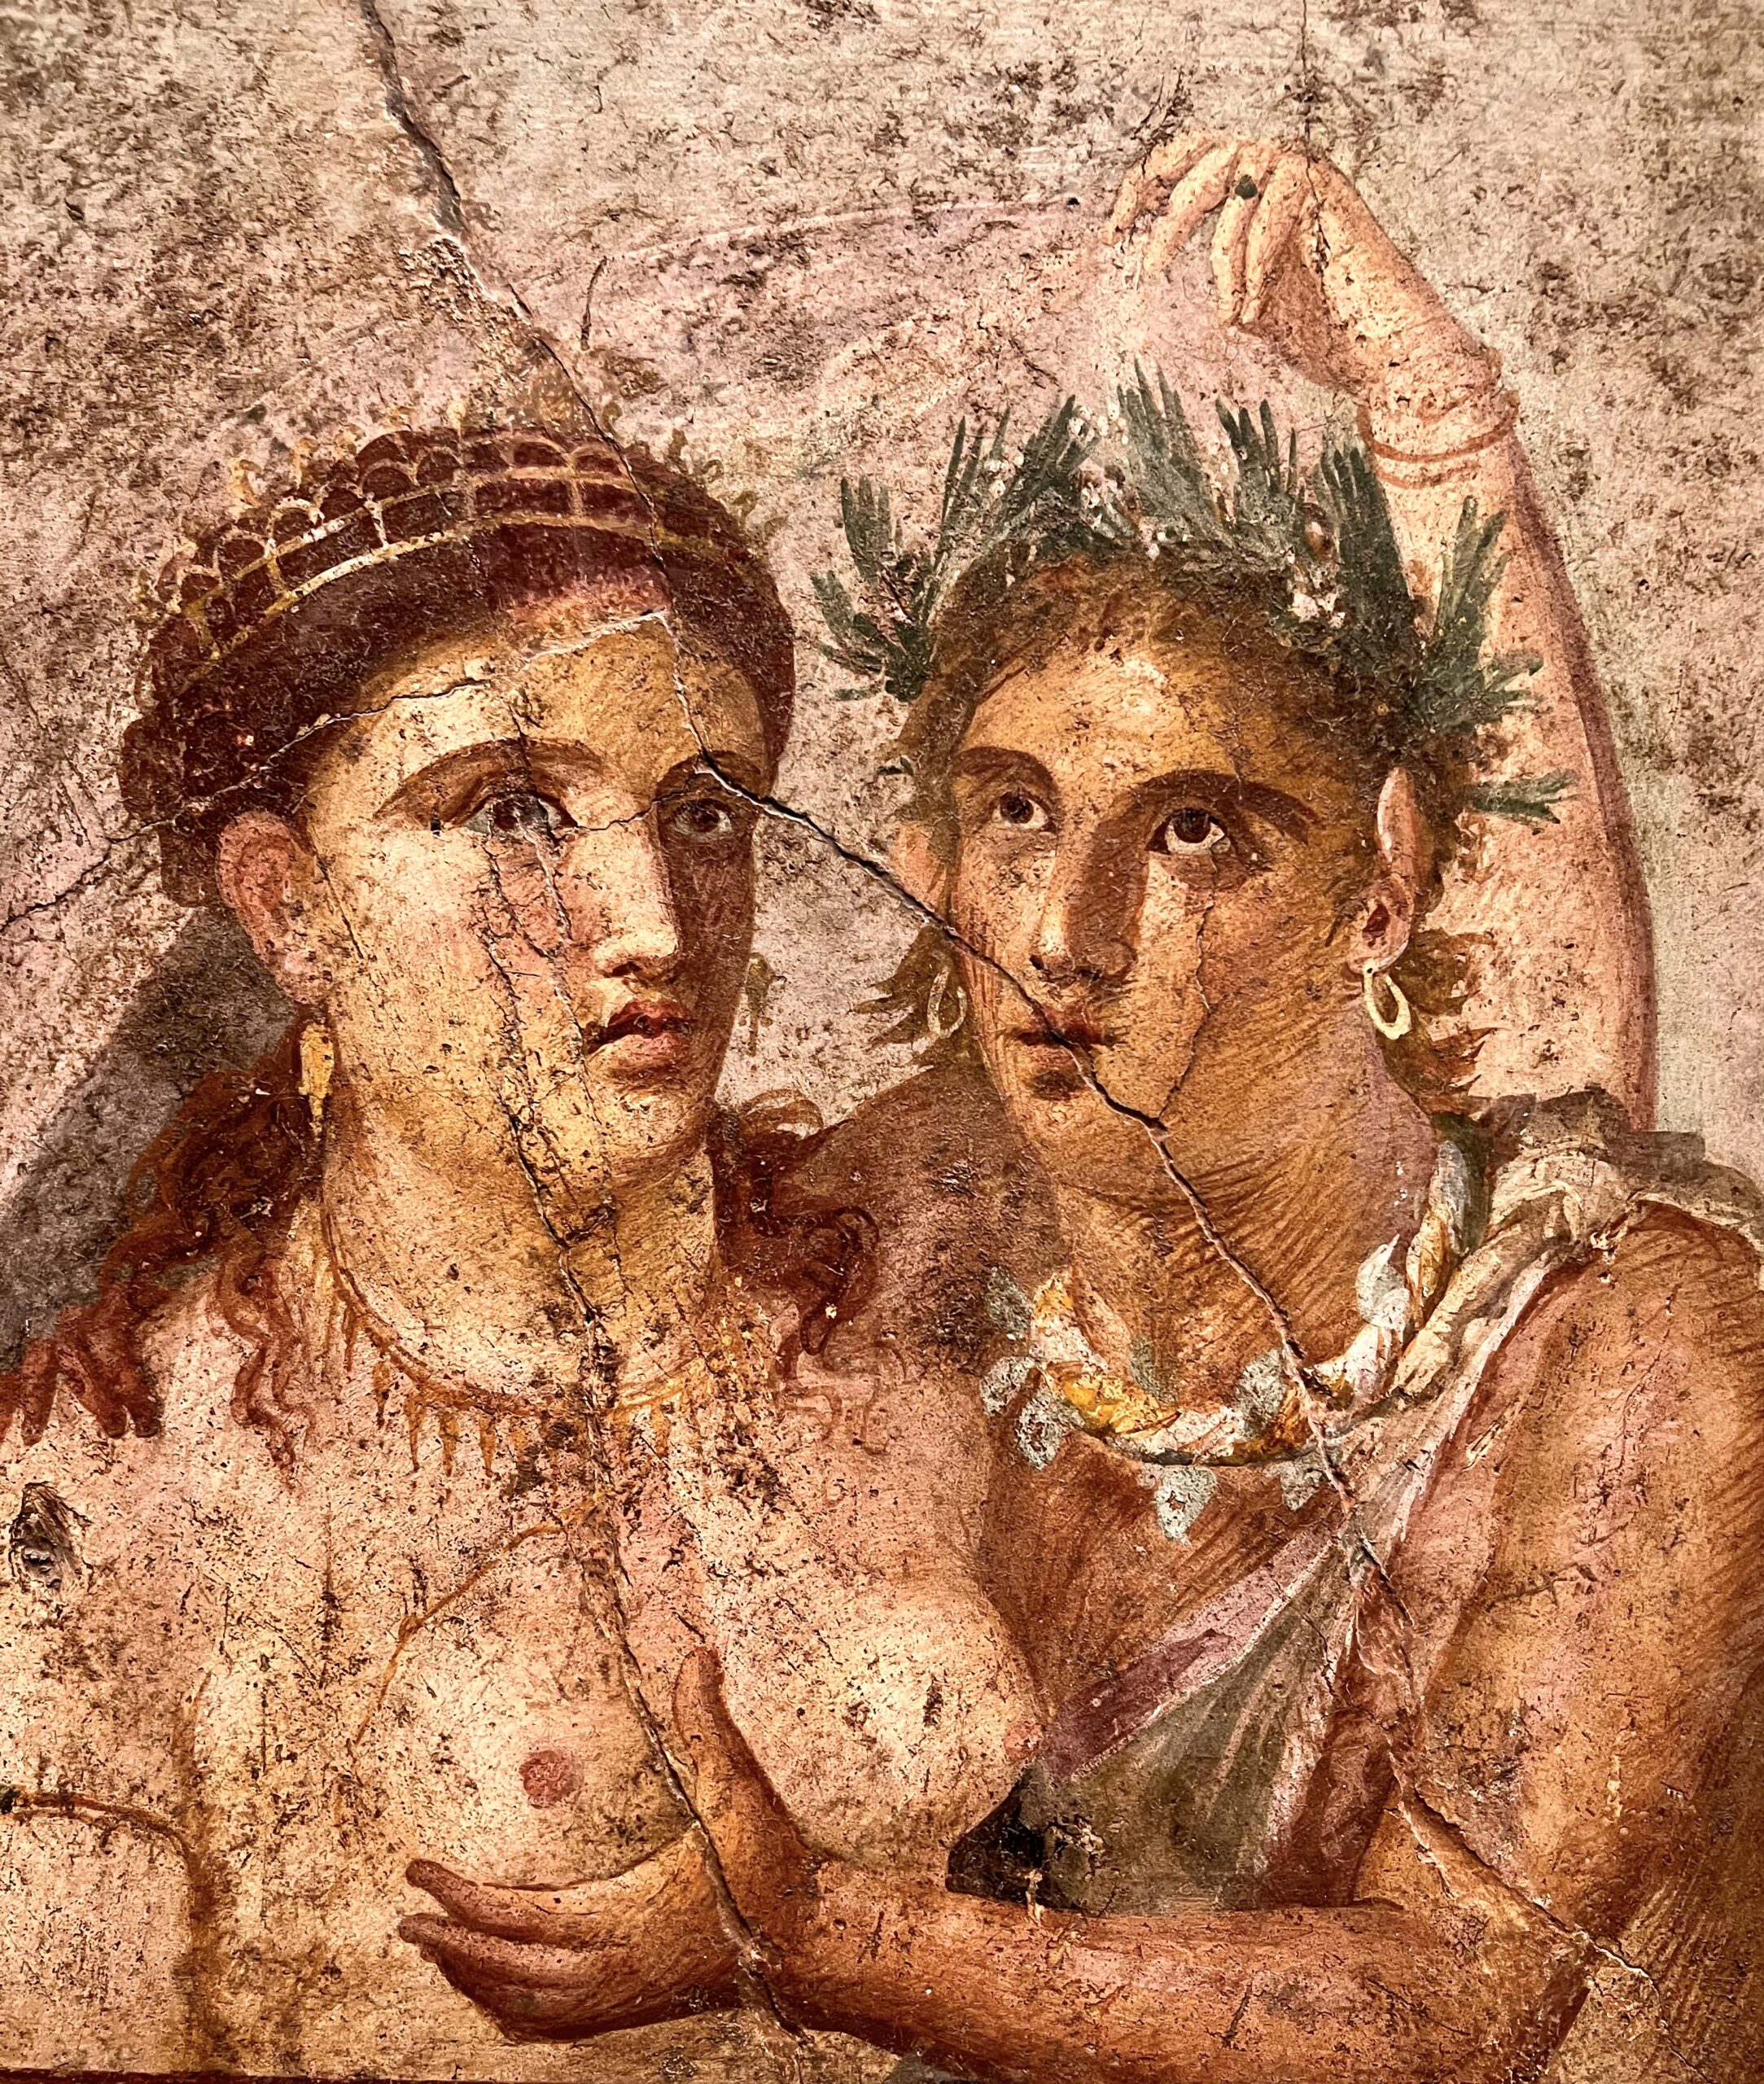 Sacrifice scene depicted in the Roman fresco from Pompeii, now on display  in the National Archaeological Museum (Museo Archeologico Nazionale di  Napoli) in Naples, Campania, Italy. Two lares, in their characteristic  clothing